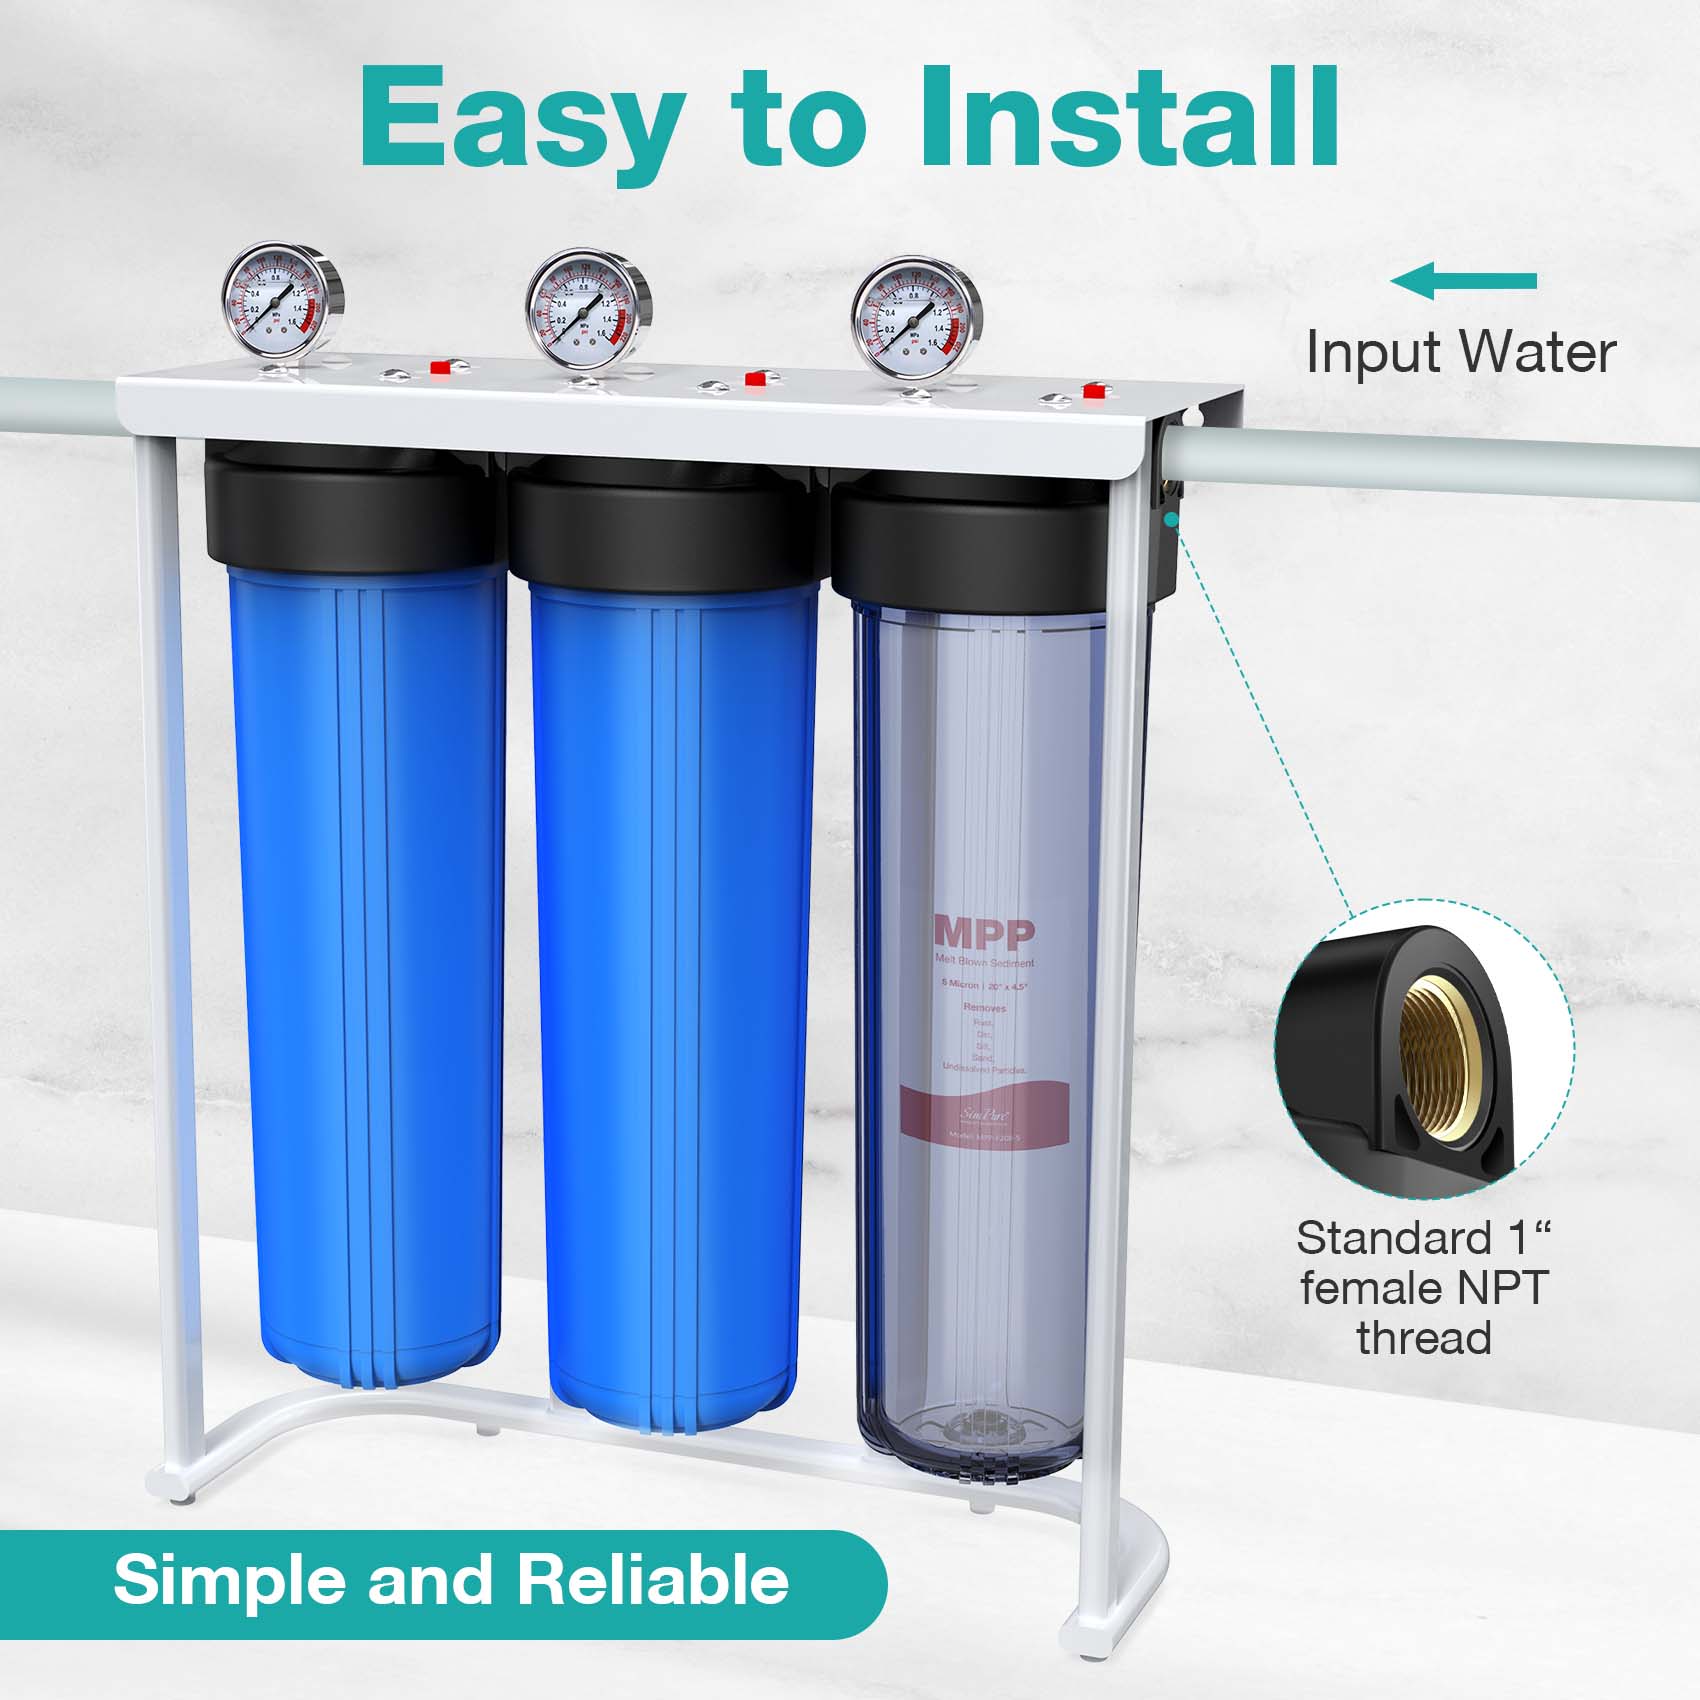 SimPure DB20P-3 3-Stage Whole House Water Filtration System with 5 Micron 20” x 4.5” Sediment & Carbon Water Filters for Well Water